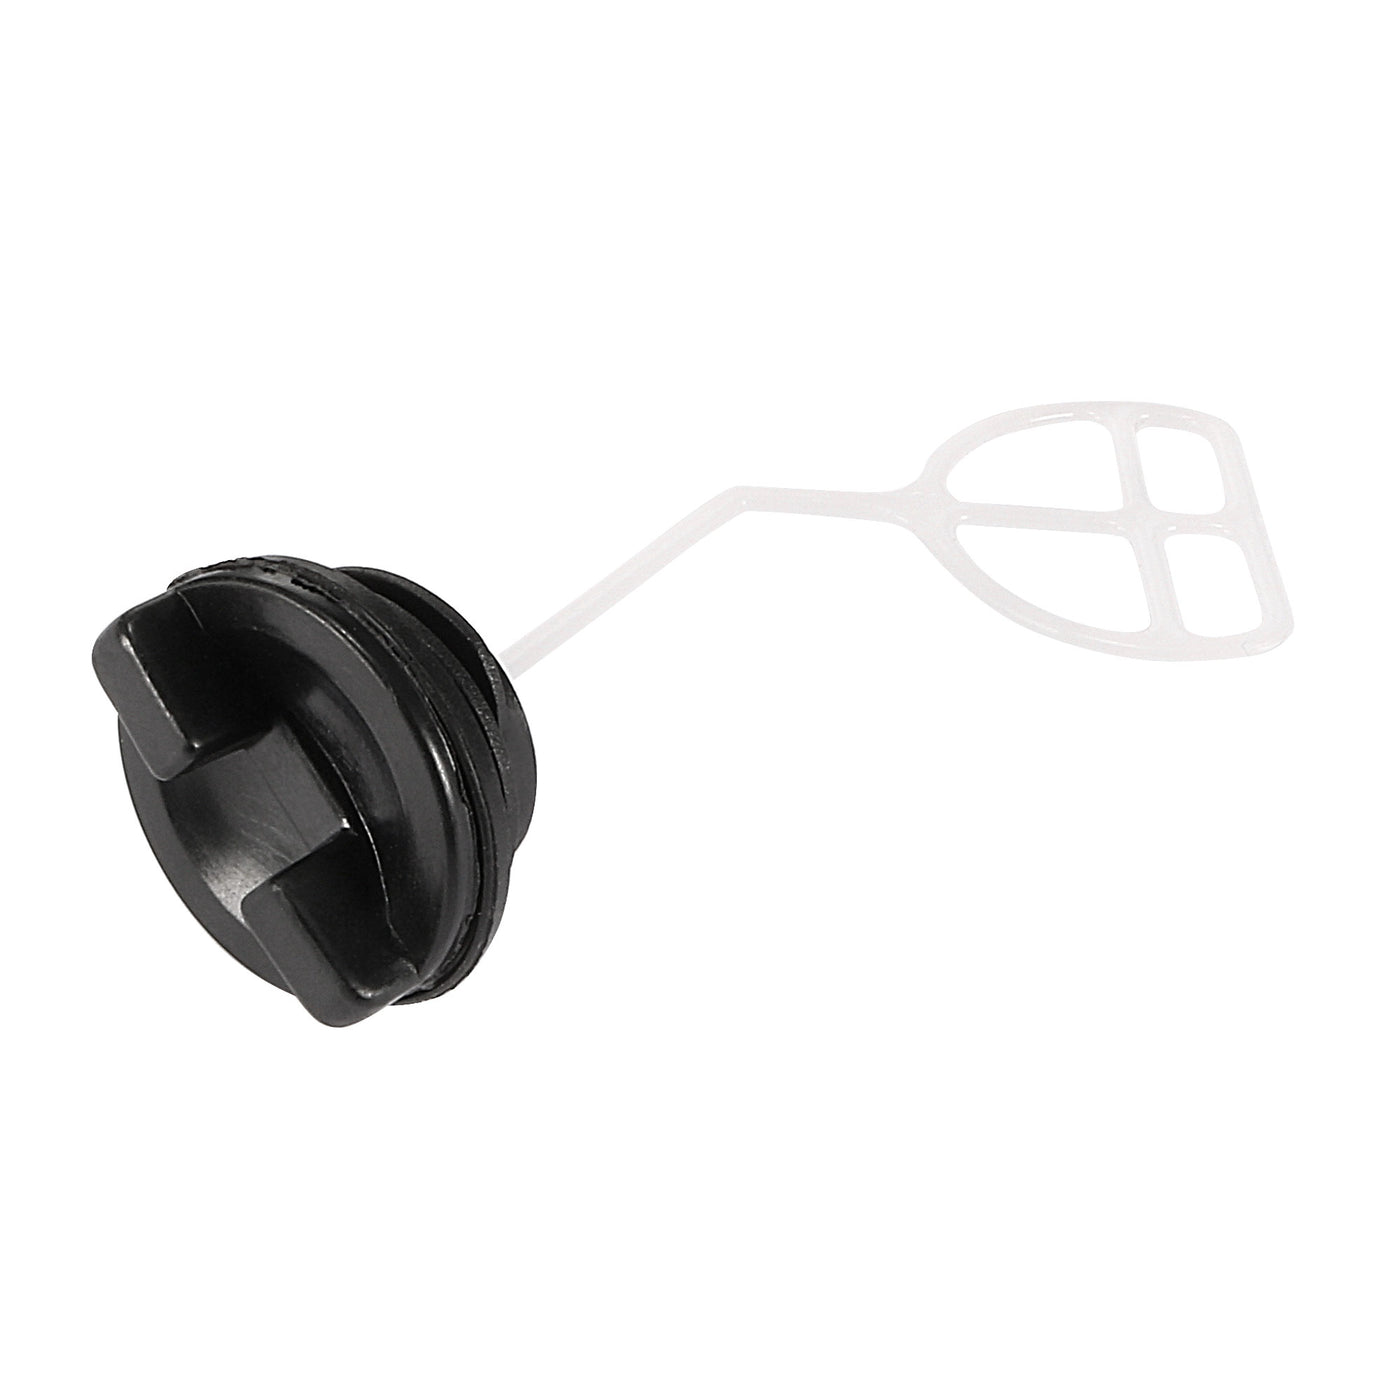 uxcell Uxcell 45/52/58 Oil Fuel Cap for Chainsaw